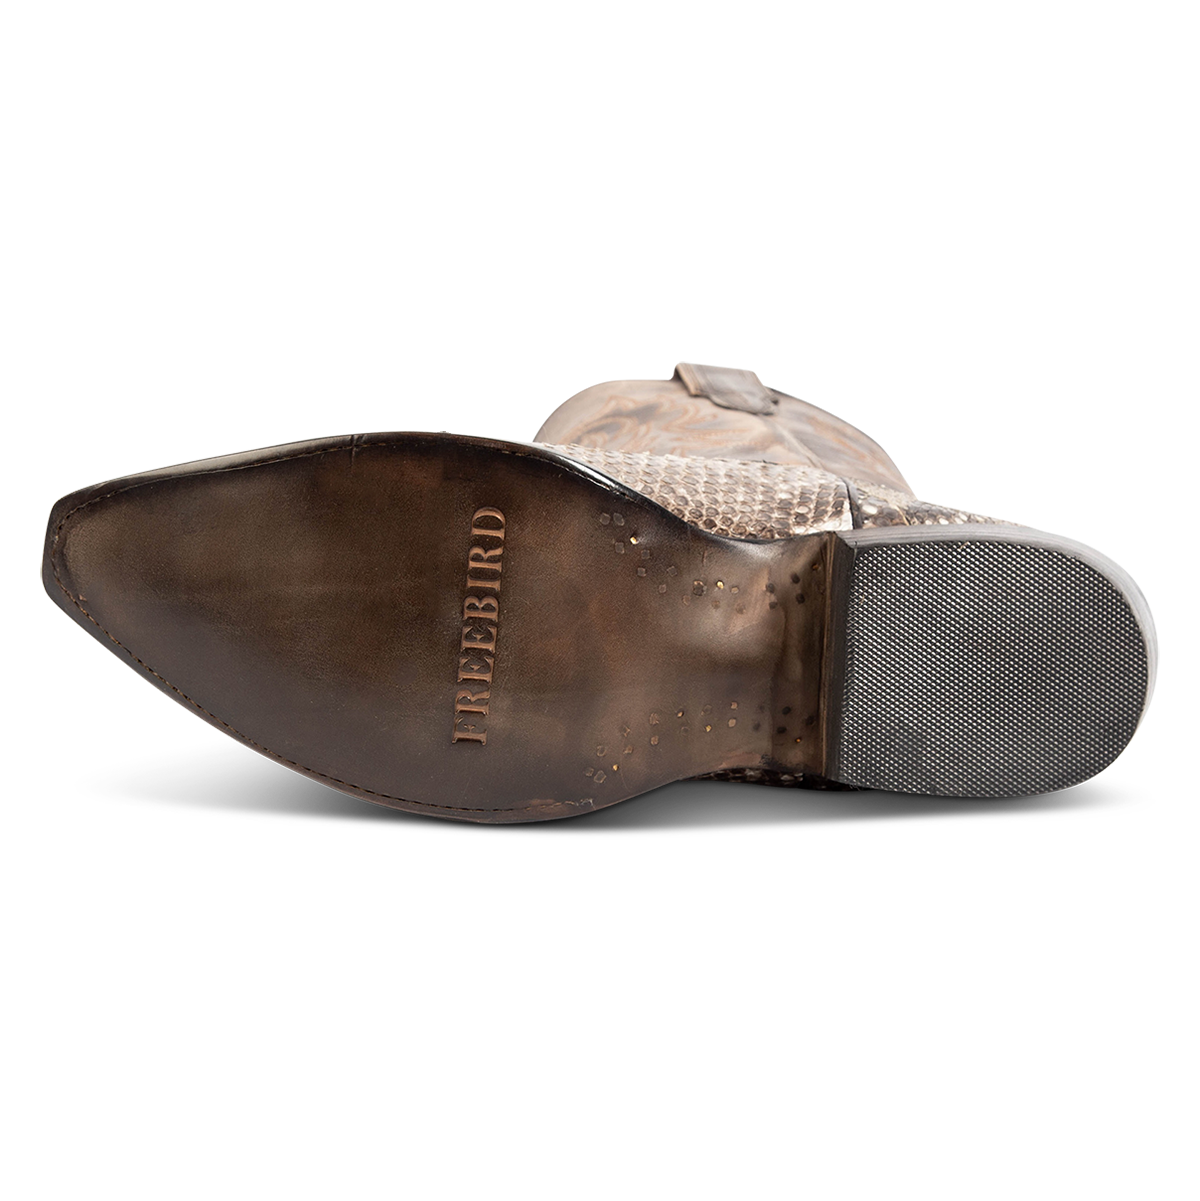 Leather sole imprinted with FREEBIRD on men's Marshall grey python leather western cowboy boot